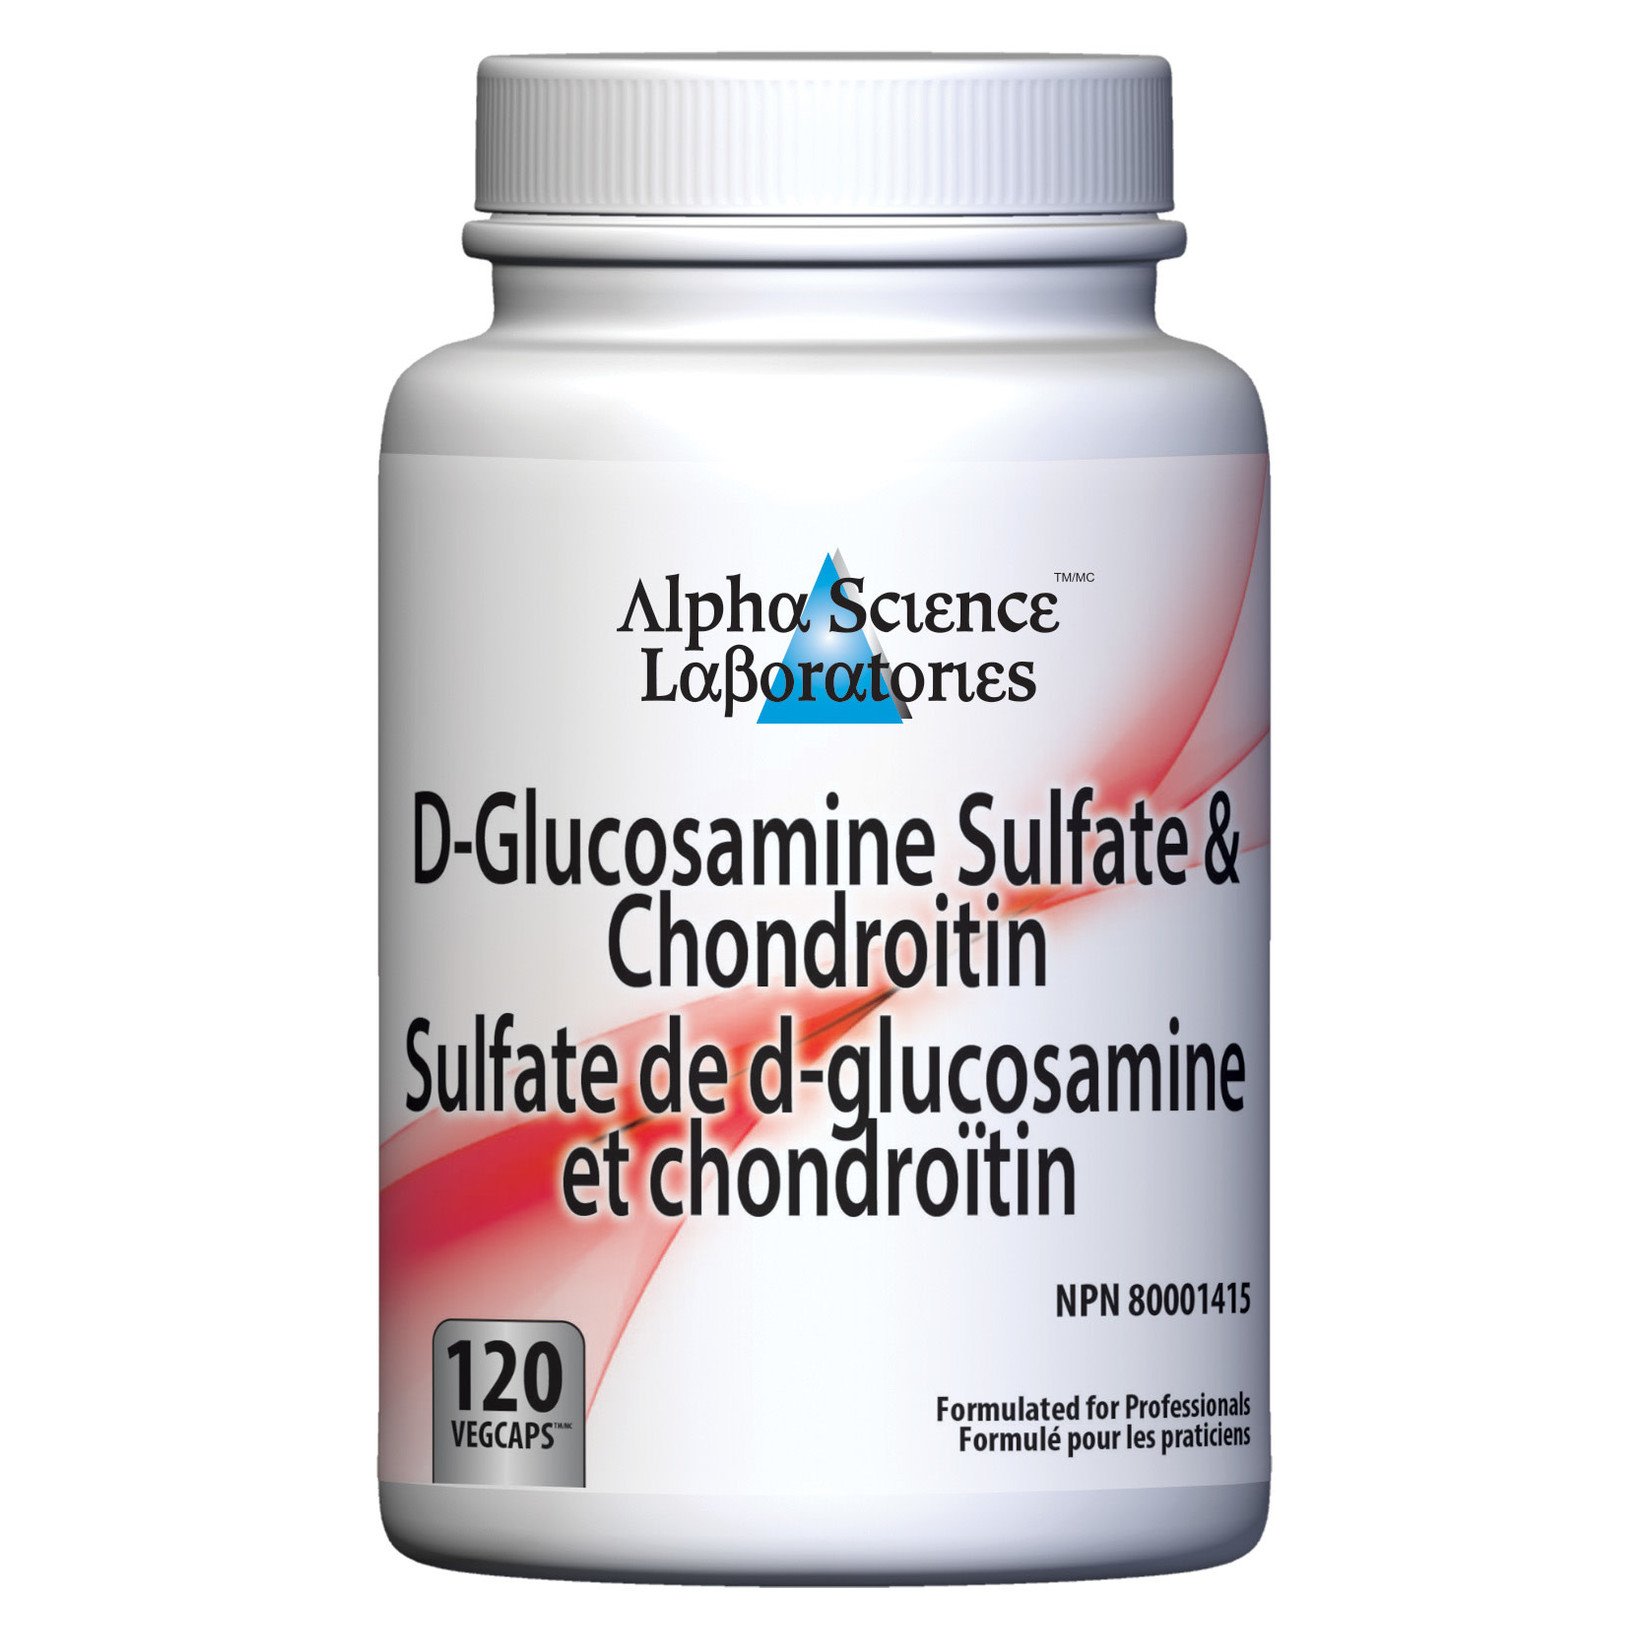 ALPHA SCIENCE LABORATORIES ALPHA SCIENCE LABS D-GLUCOSAMINE SULPHATE & CHONDROITIN 120 VEGICAPS